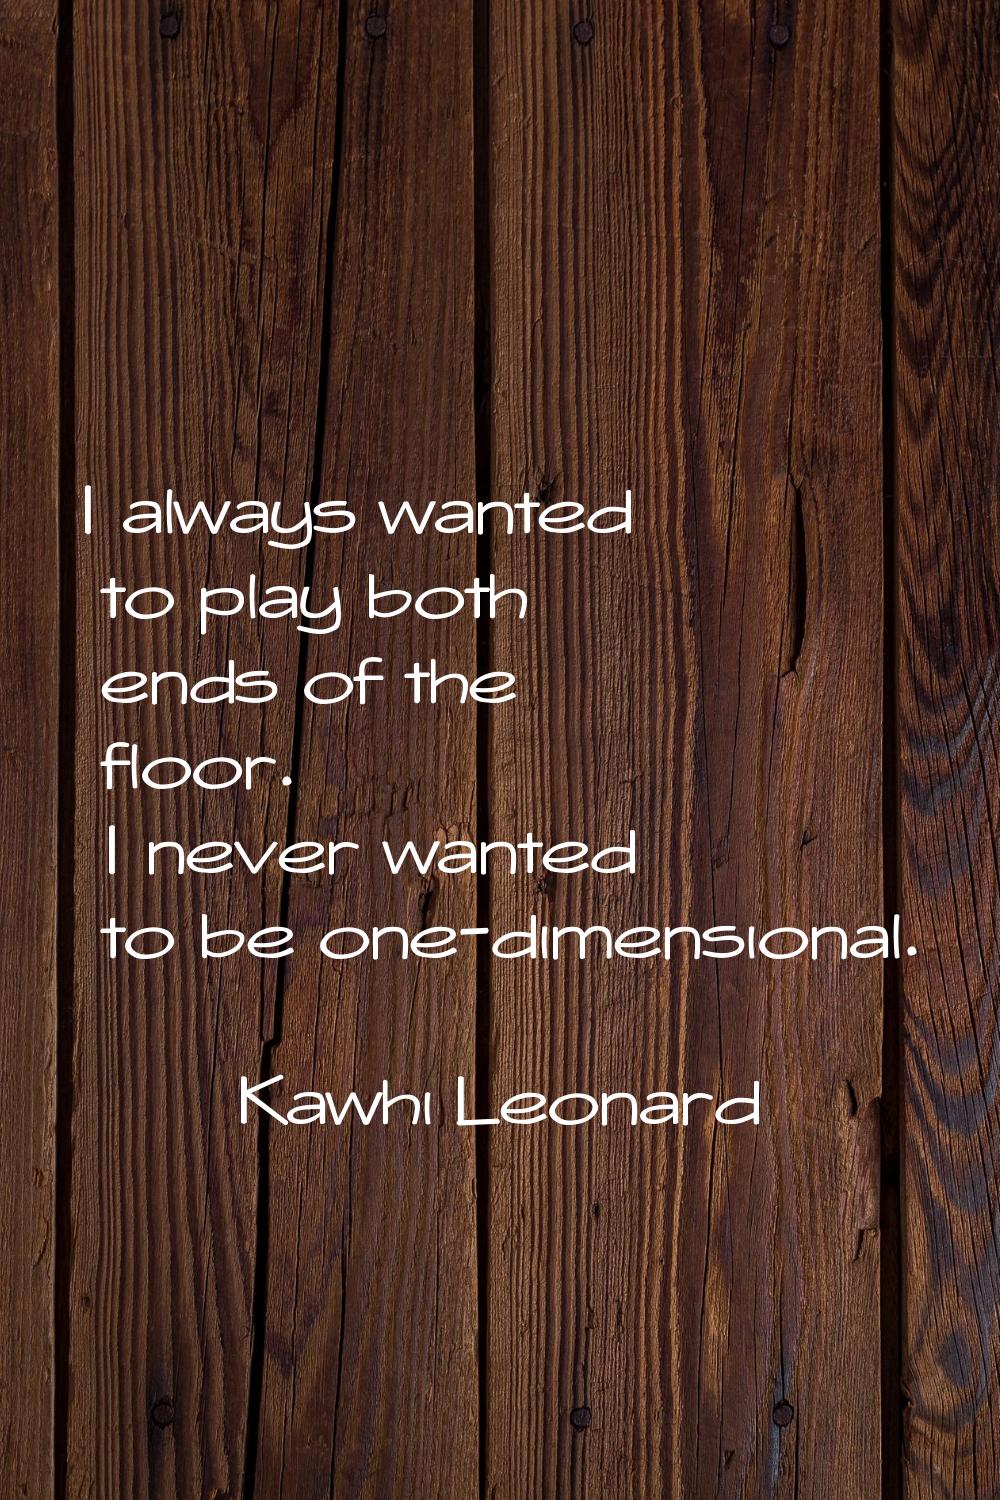 I always wanted to play both ends of the floor. I never wanted to be one-dimensional.